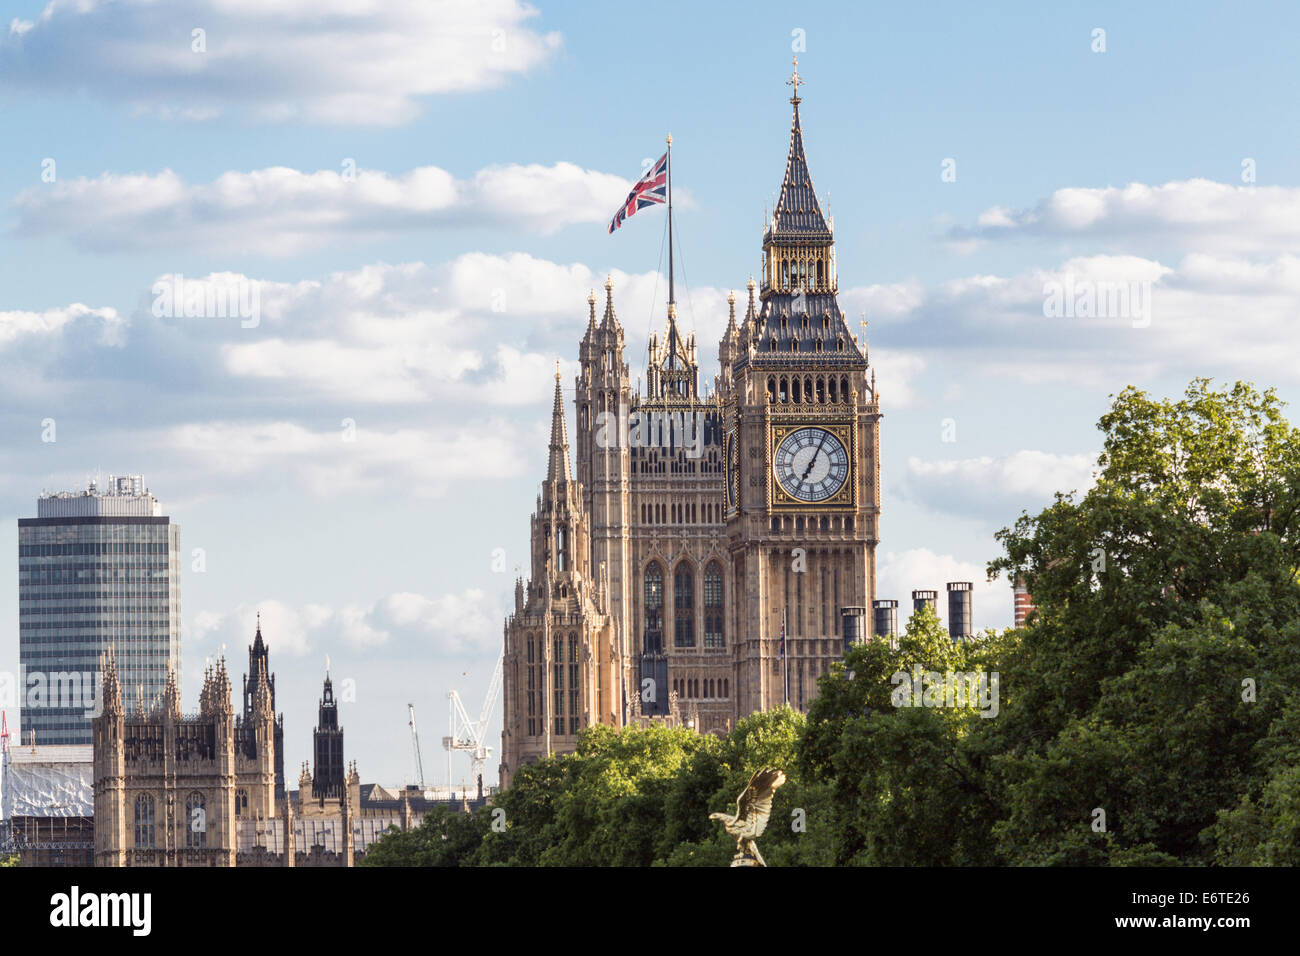 Big Ben - the clock tower on the Houses of Parliament against blue summer sky with copy space & no people, Westminster, London, England, UK Stock Photo